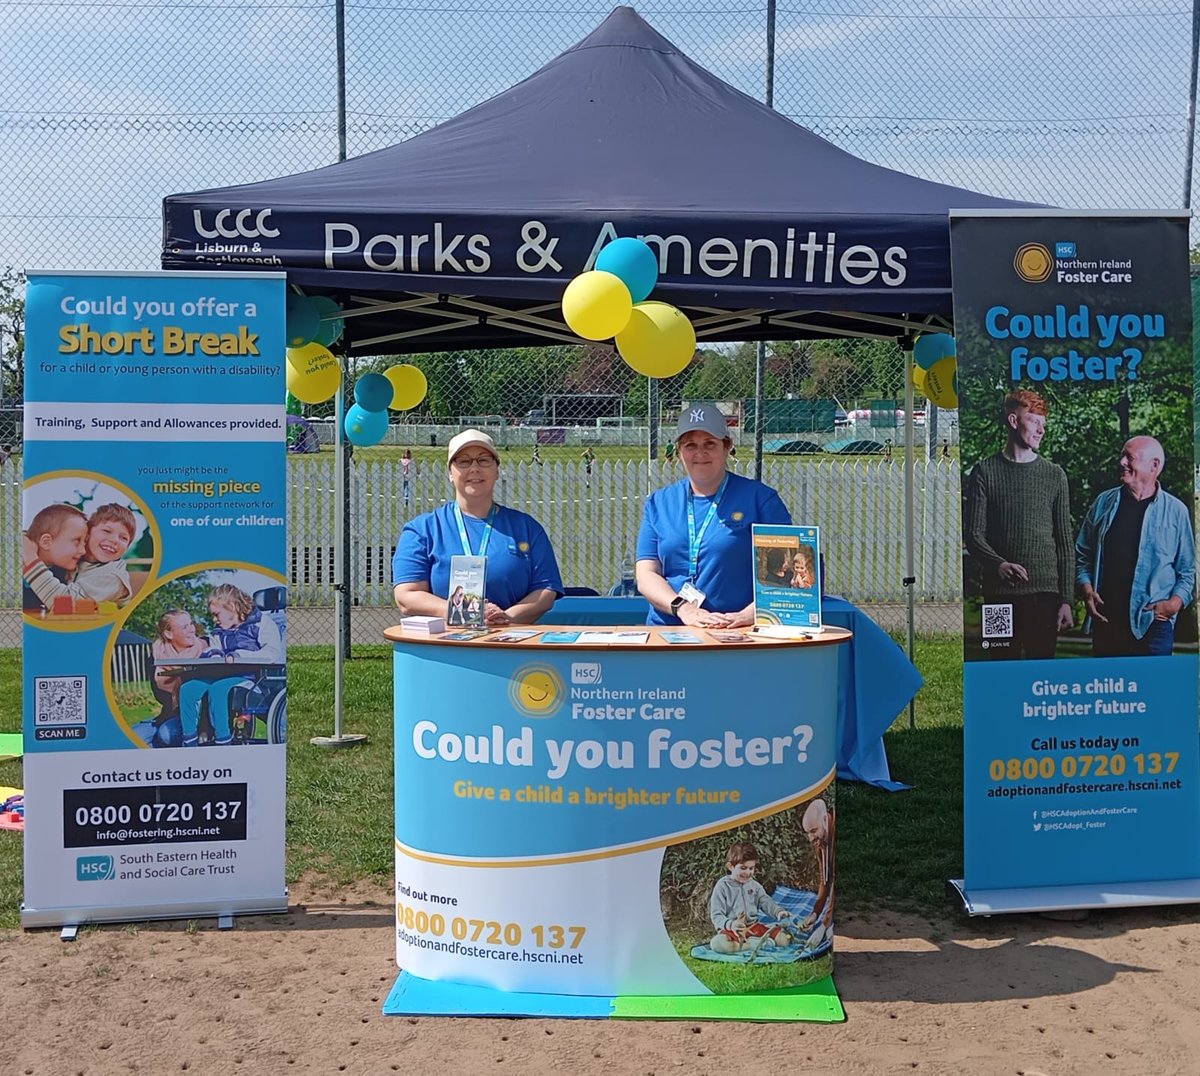 Fostering and Disability Fostering staff were at the Lisburn Mayor's Family Fun Day yesterday to talk about fostering in the sunshine! #FCF24 #couldyoufoster 
@HSCAdopt_Foster 
@setrust